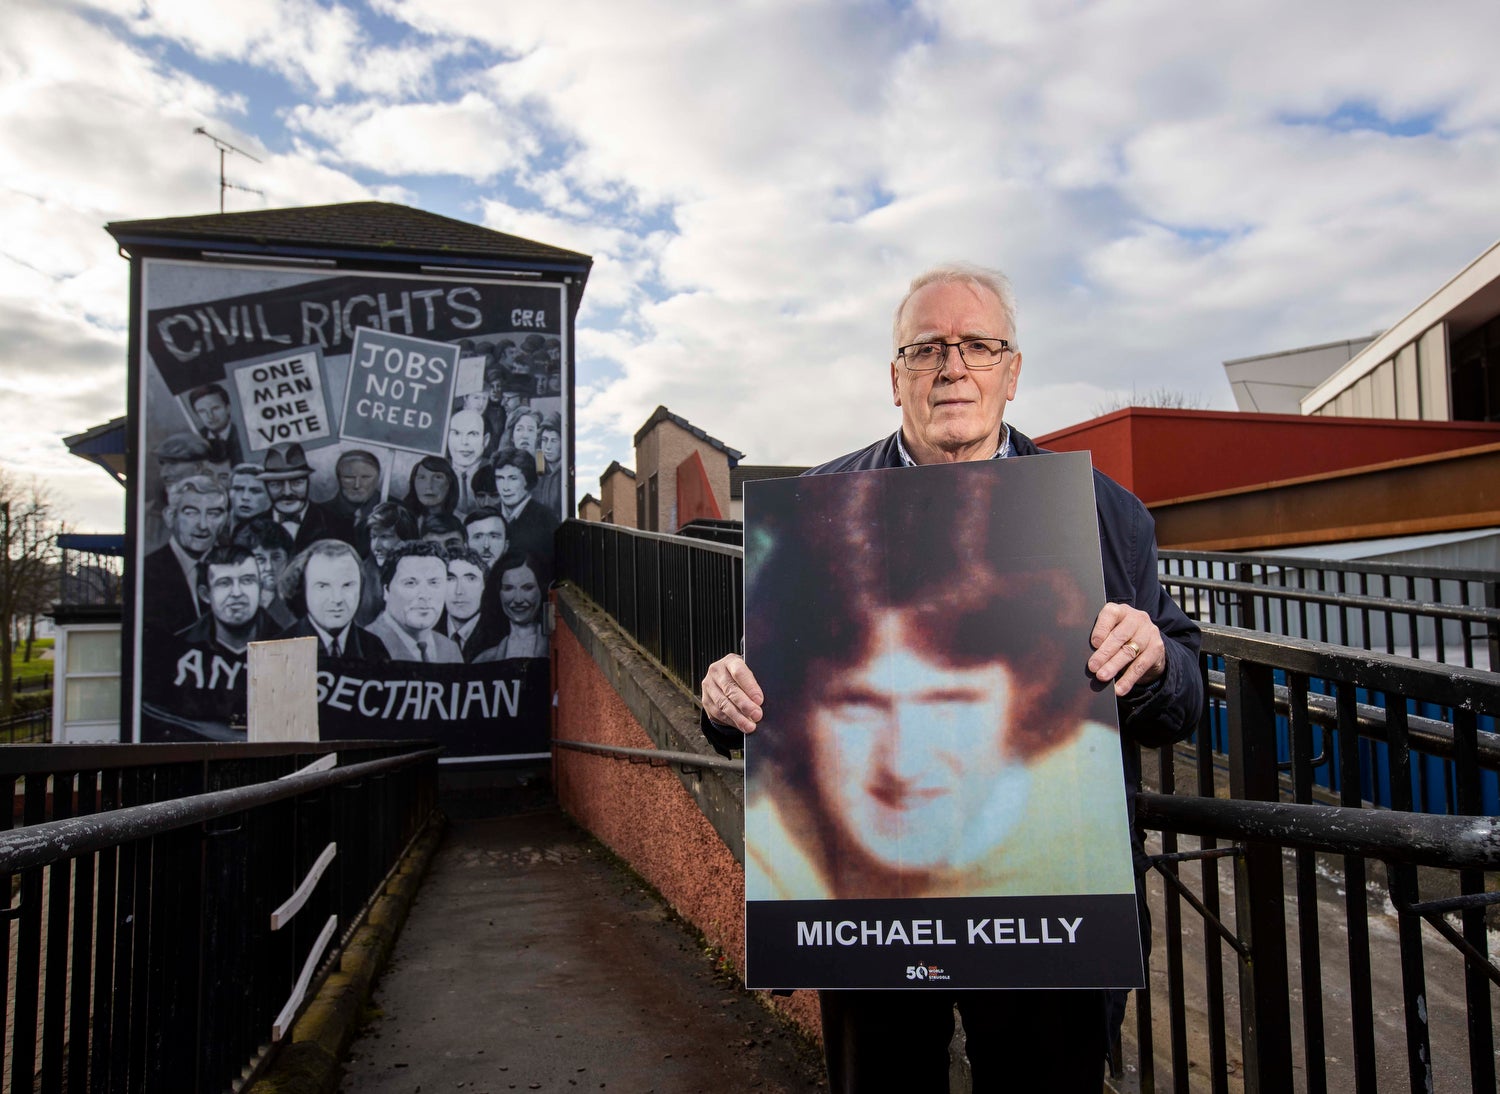 John Kelly brother of Michael Kelly killed on Bloody Sunday in Derry’s Bogside in 1972, stands holding an image of his brother beside the Civil Rights mural in Derry. PA Photo. Picture date: Monday January 24 2022. See PA story ULSTER BloodySunday. Photo credit should read: Liam McBurney/PA Wire